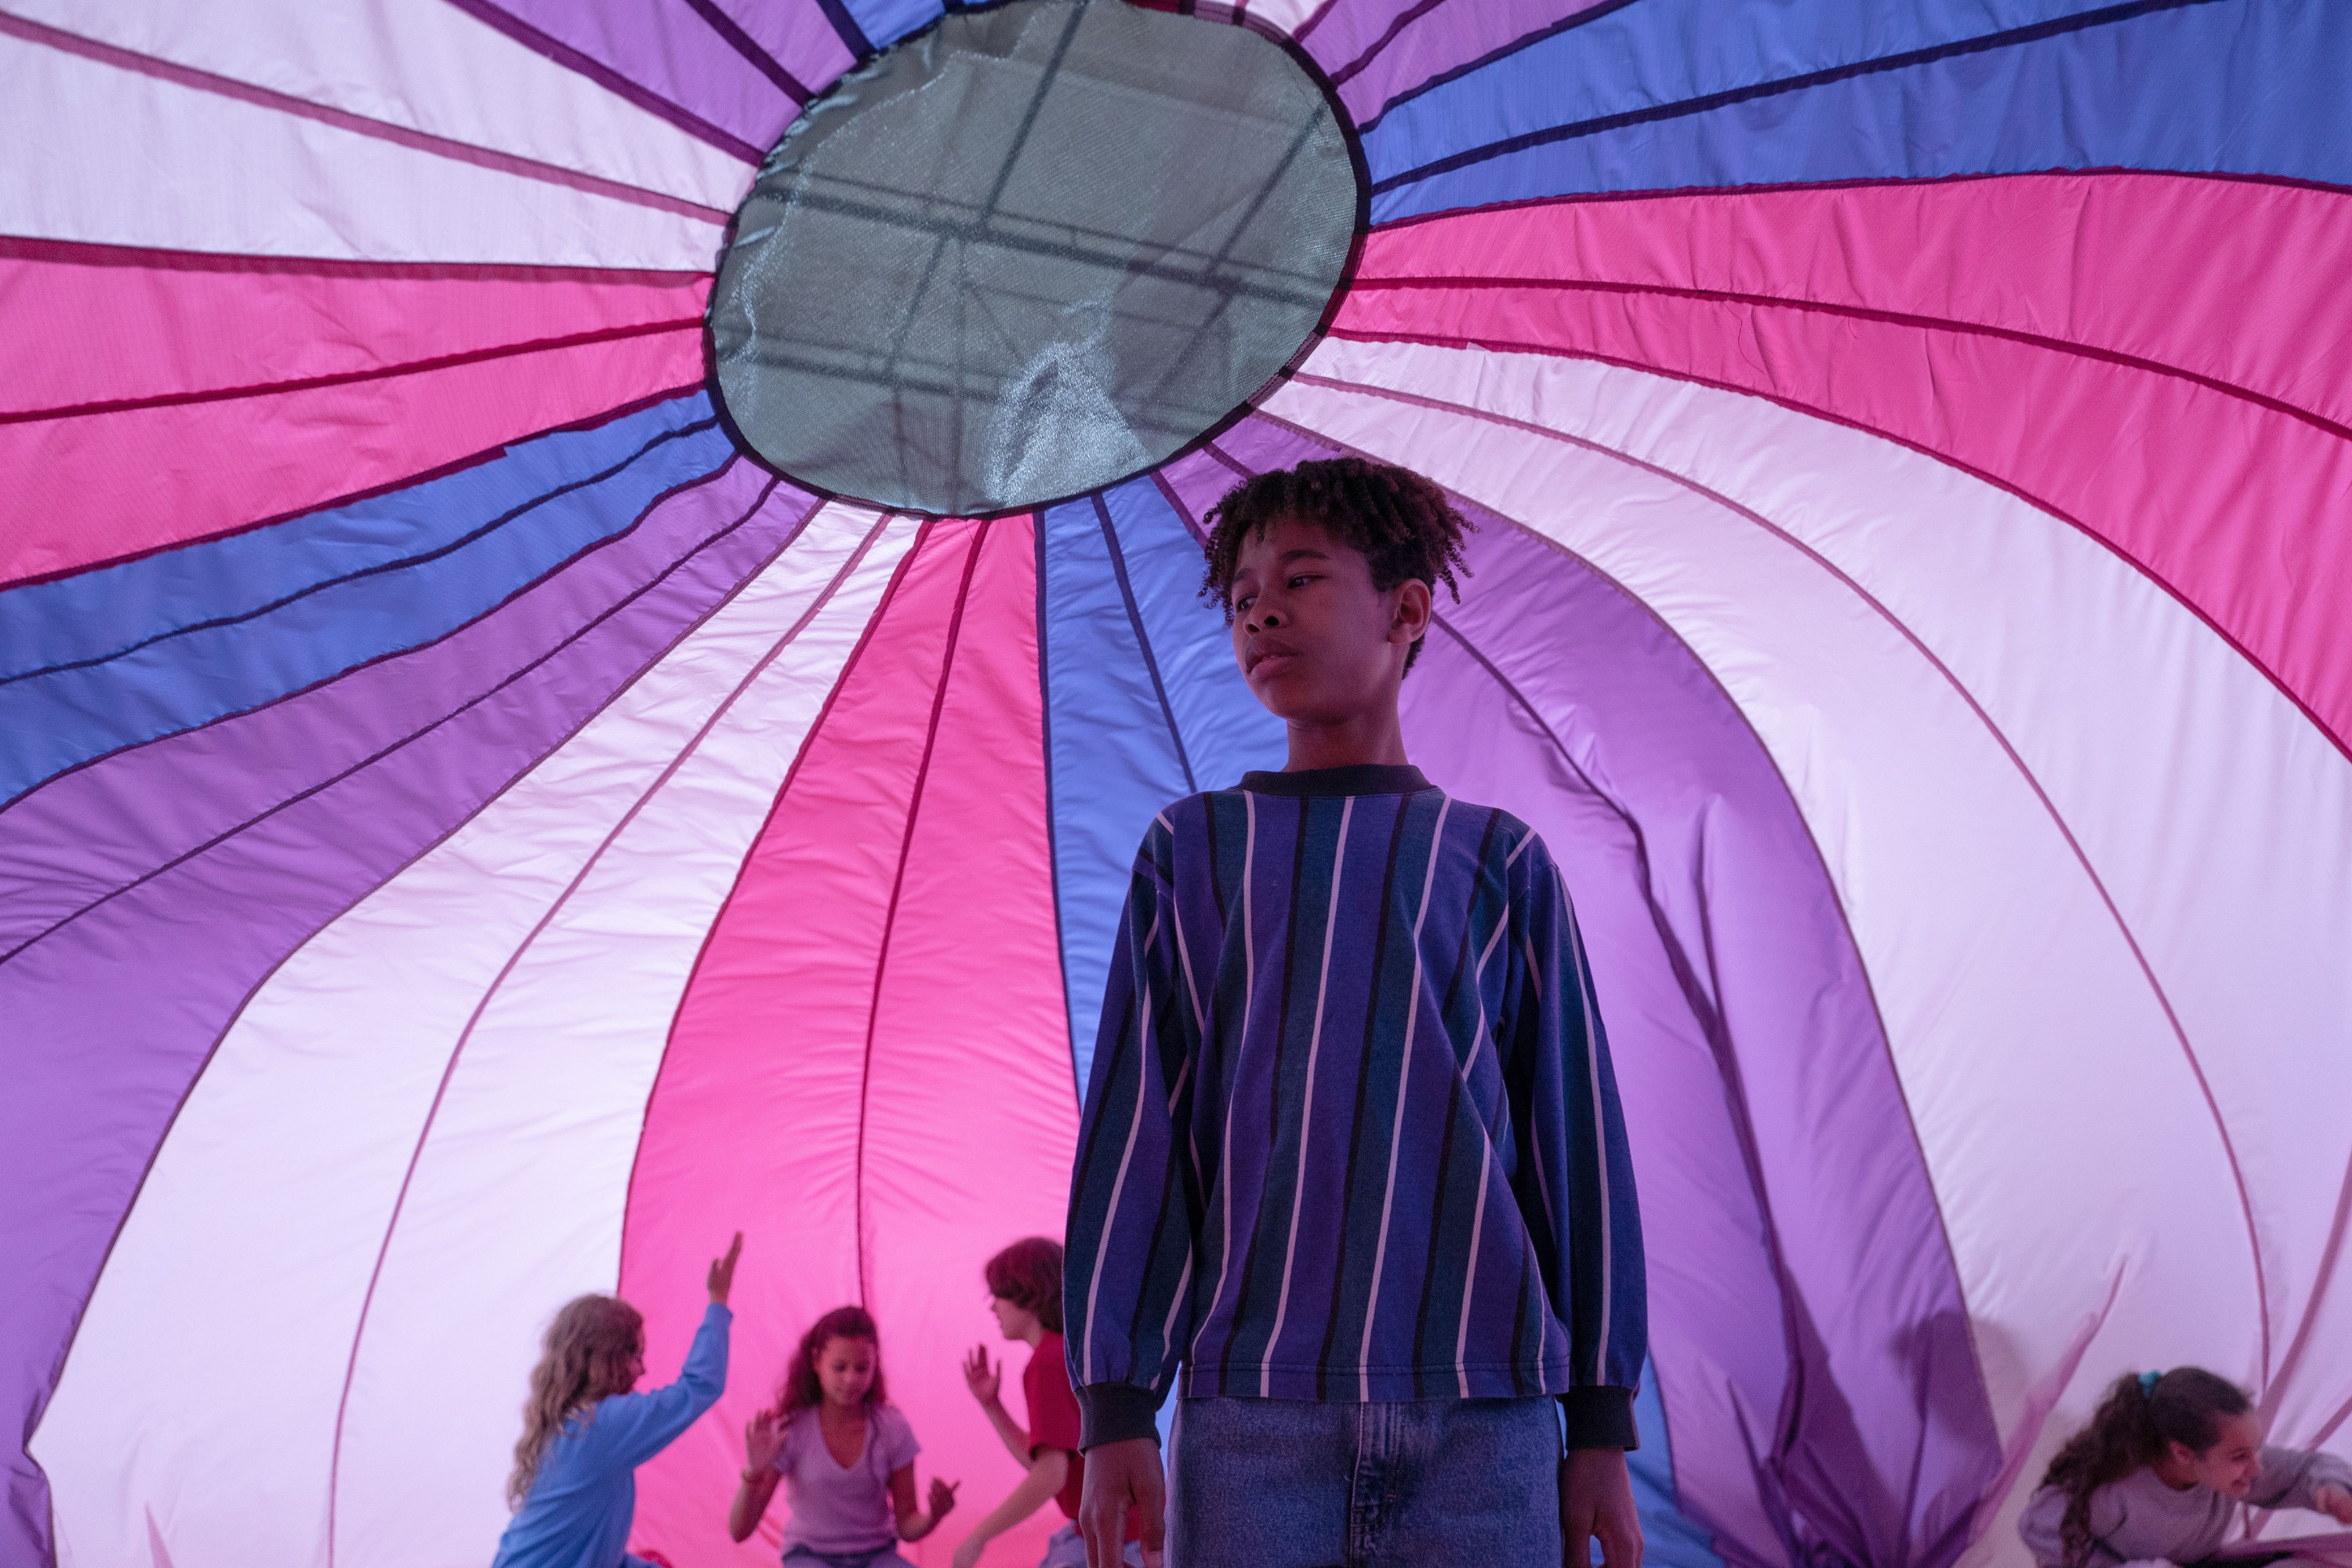 Young Owen (Ian Foreman) stands with classmates under a huge gym-class parachute in the bisexual-flag colors of pink, blue, and purple in Jane Schoenbrun’s movie I Saw the TV Glow